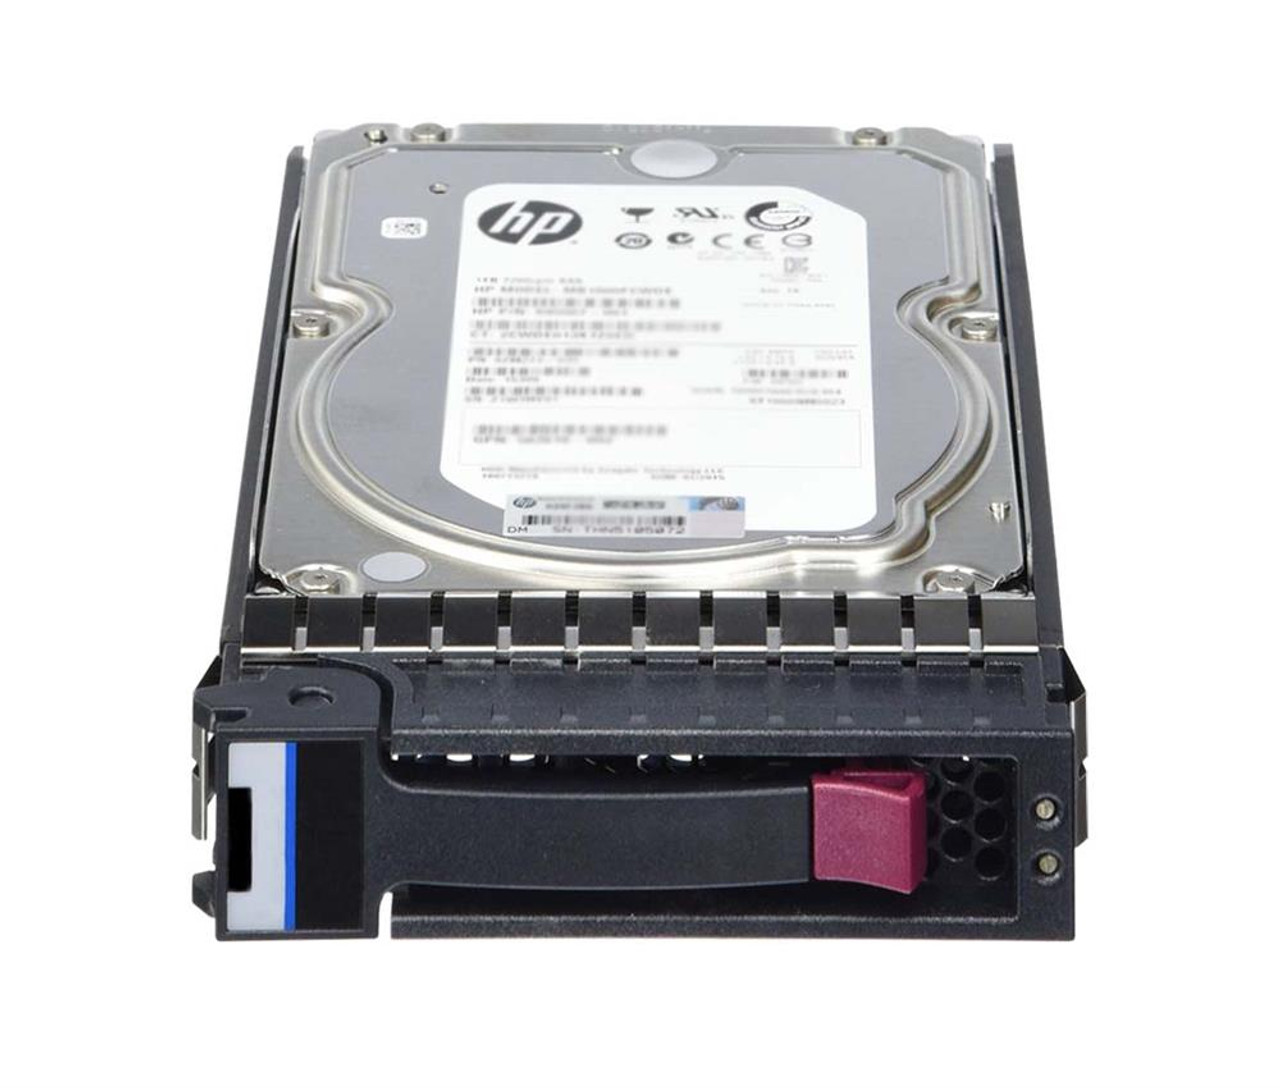 846523-004 HPE 4TB 7200RPM SAS 12Gbps Midline 3.5-inch Internal Hard Drive with Smart Carrier